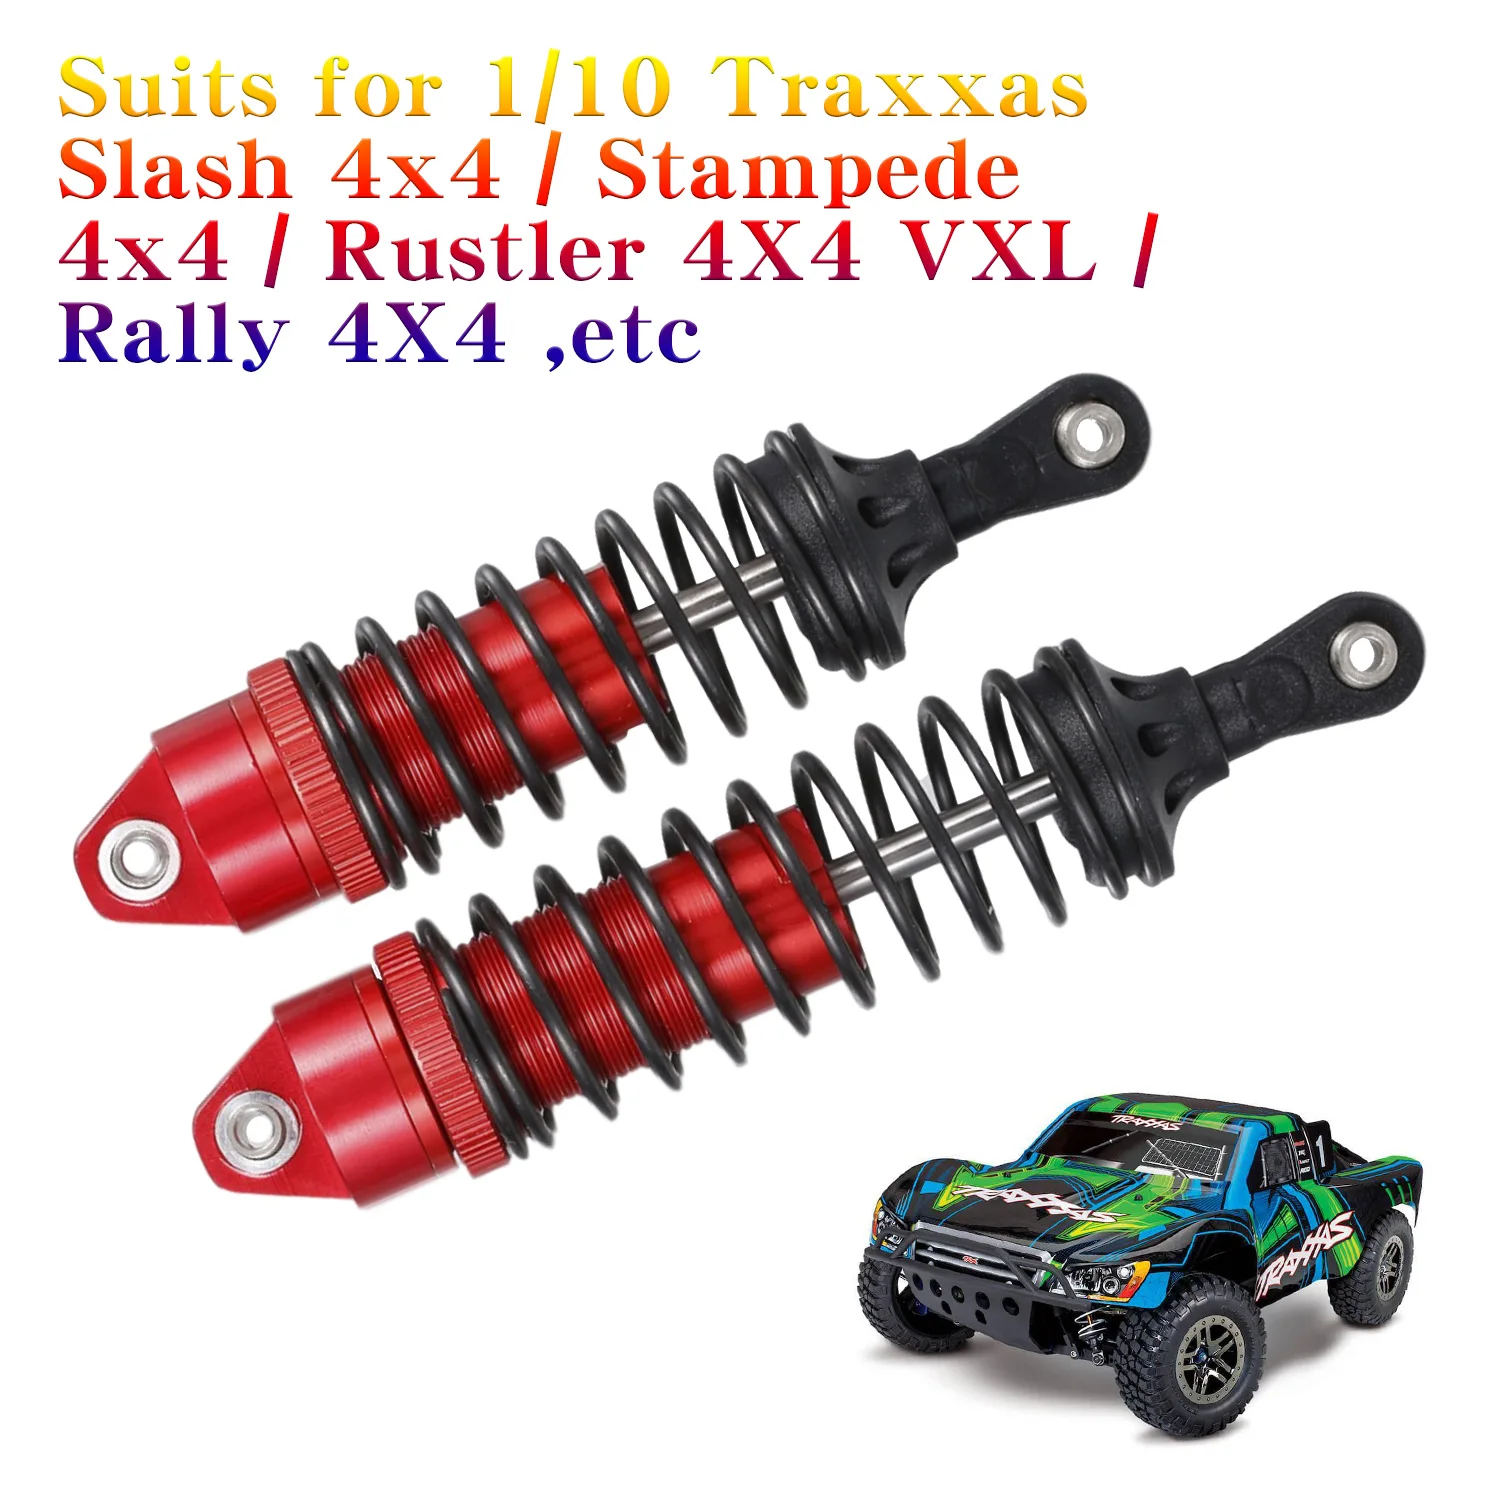 4PCS Treehobby Aluminum Alloy Front & Rear Shock Absorber Spring Adjustable for 1:10 SLA014 SLA015 Traxxas Slash 4WD Spare Part RC Car Replacement Hop-Up Color: Red 